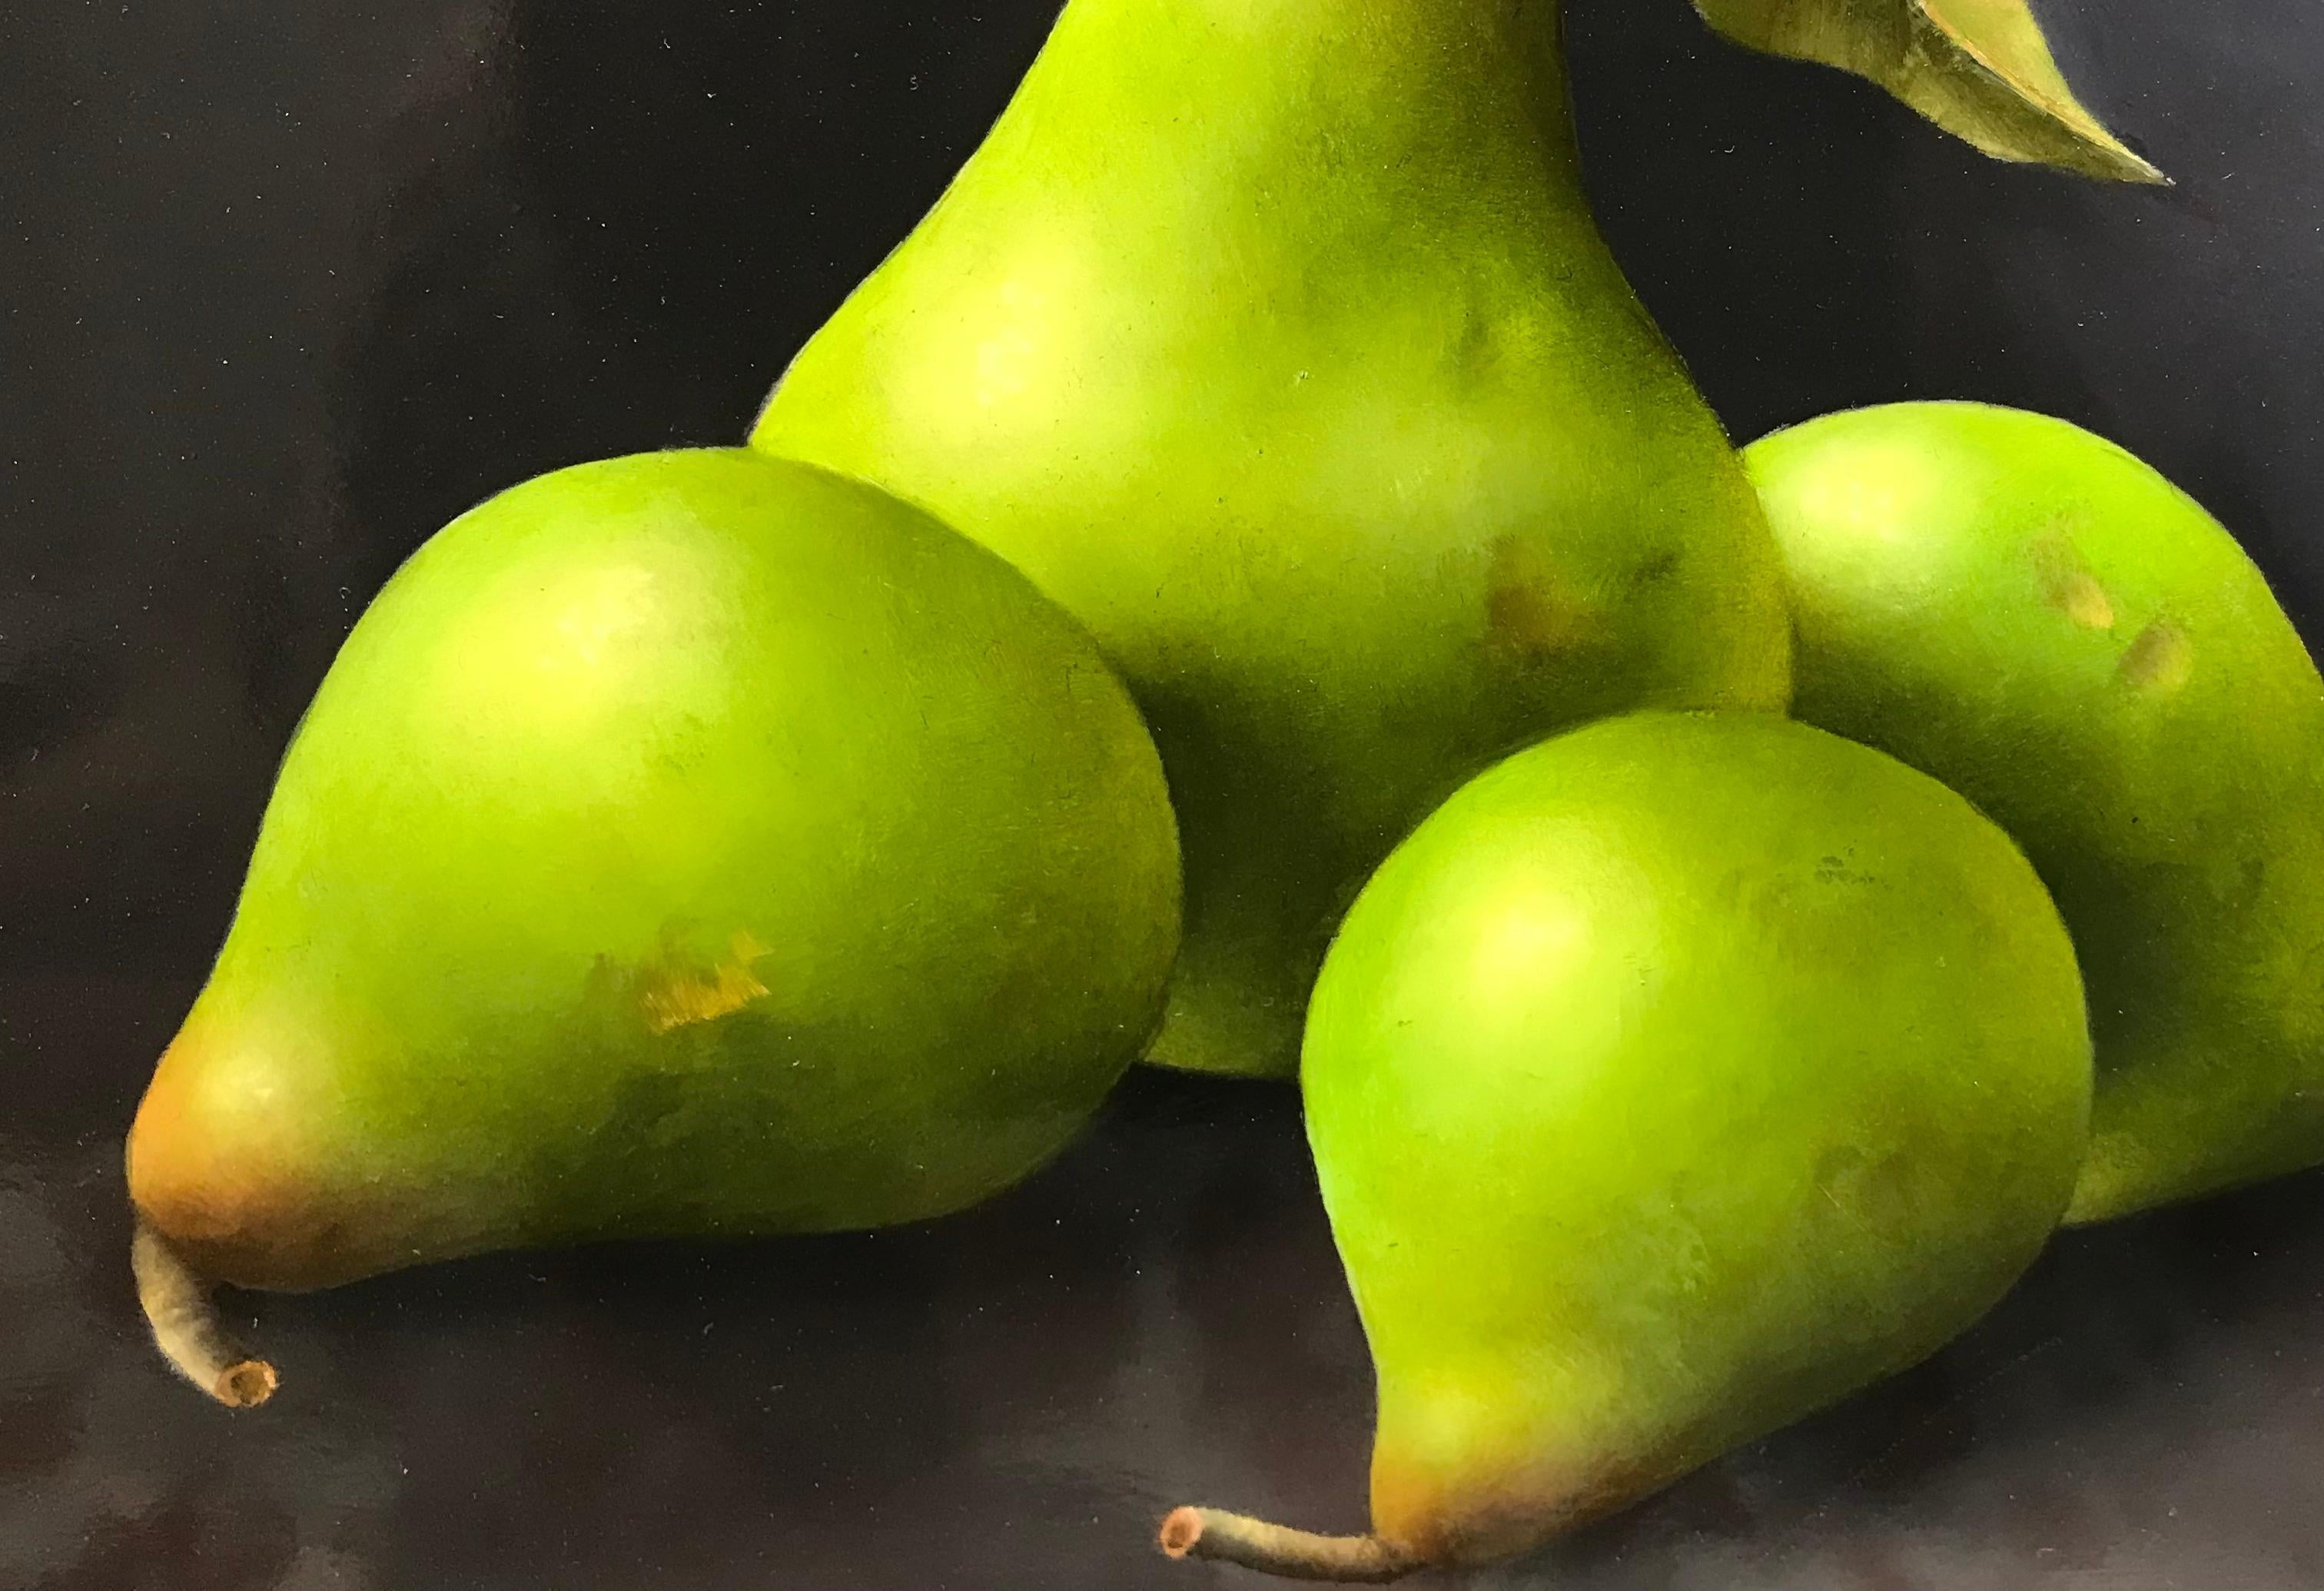 “Pears” Contemporary Fine Realist Still-Life Painting of Pears, Fruit 3